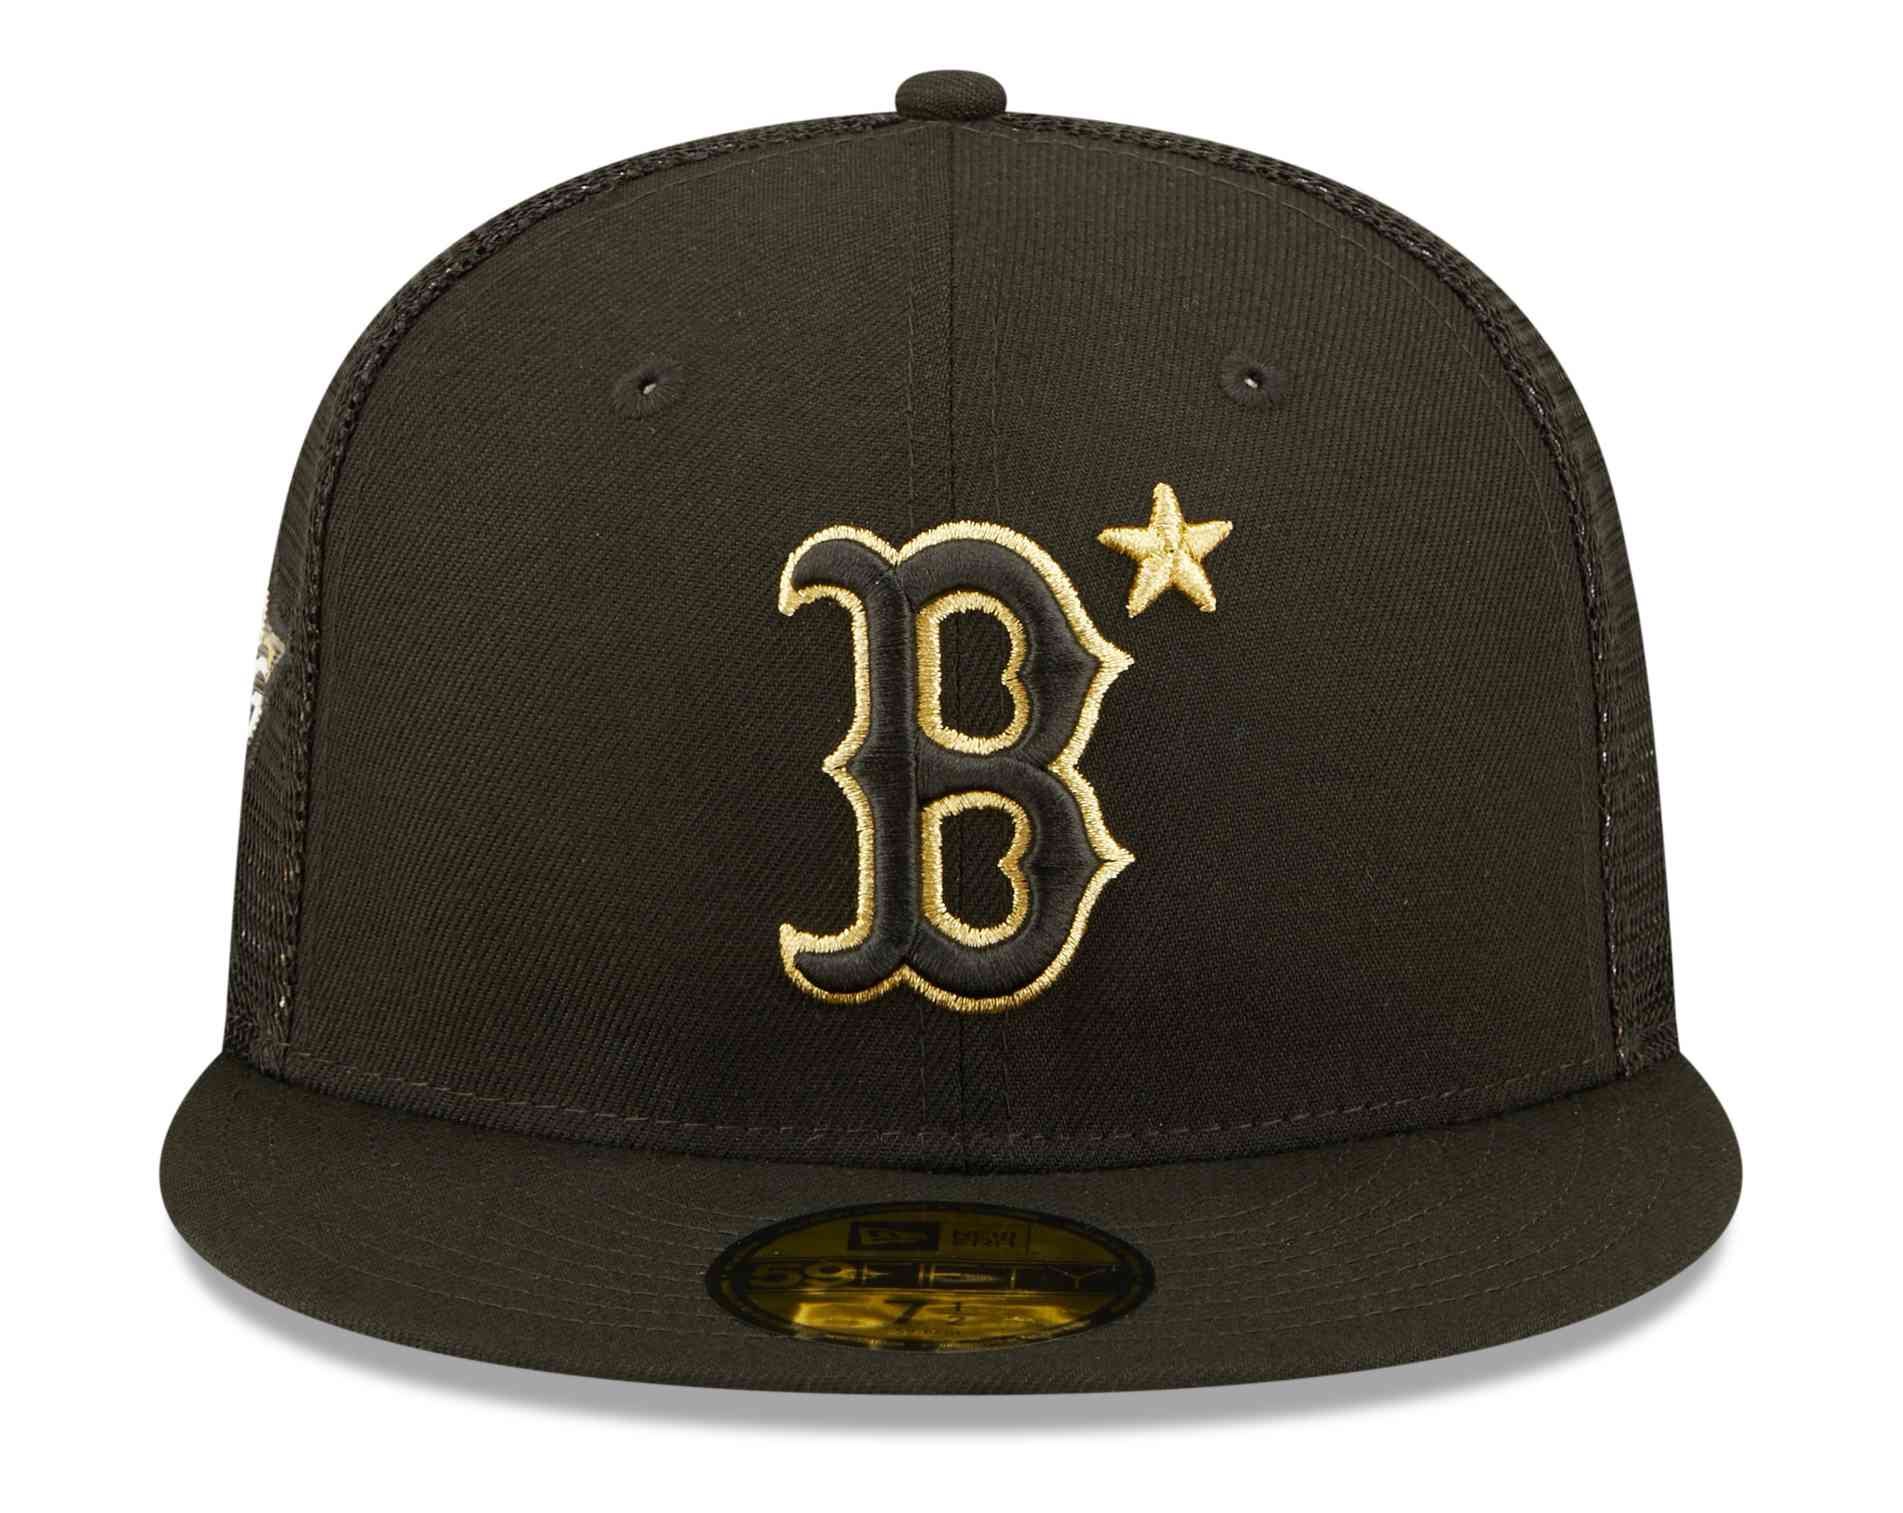 New Era - MLB Boston Red Sox All Star Game Patch 59Fifty Fitted Cap